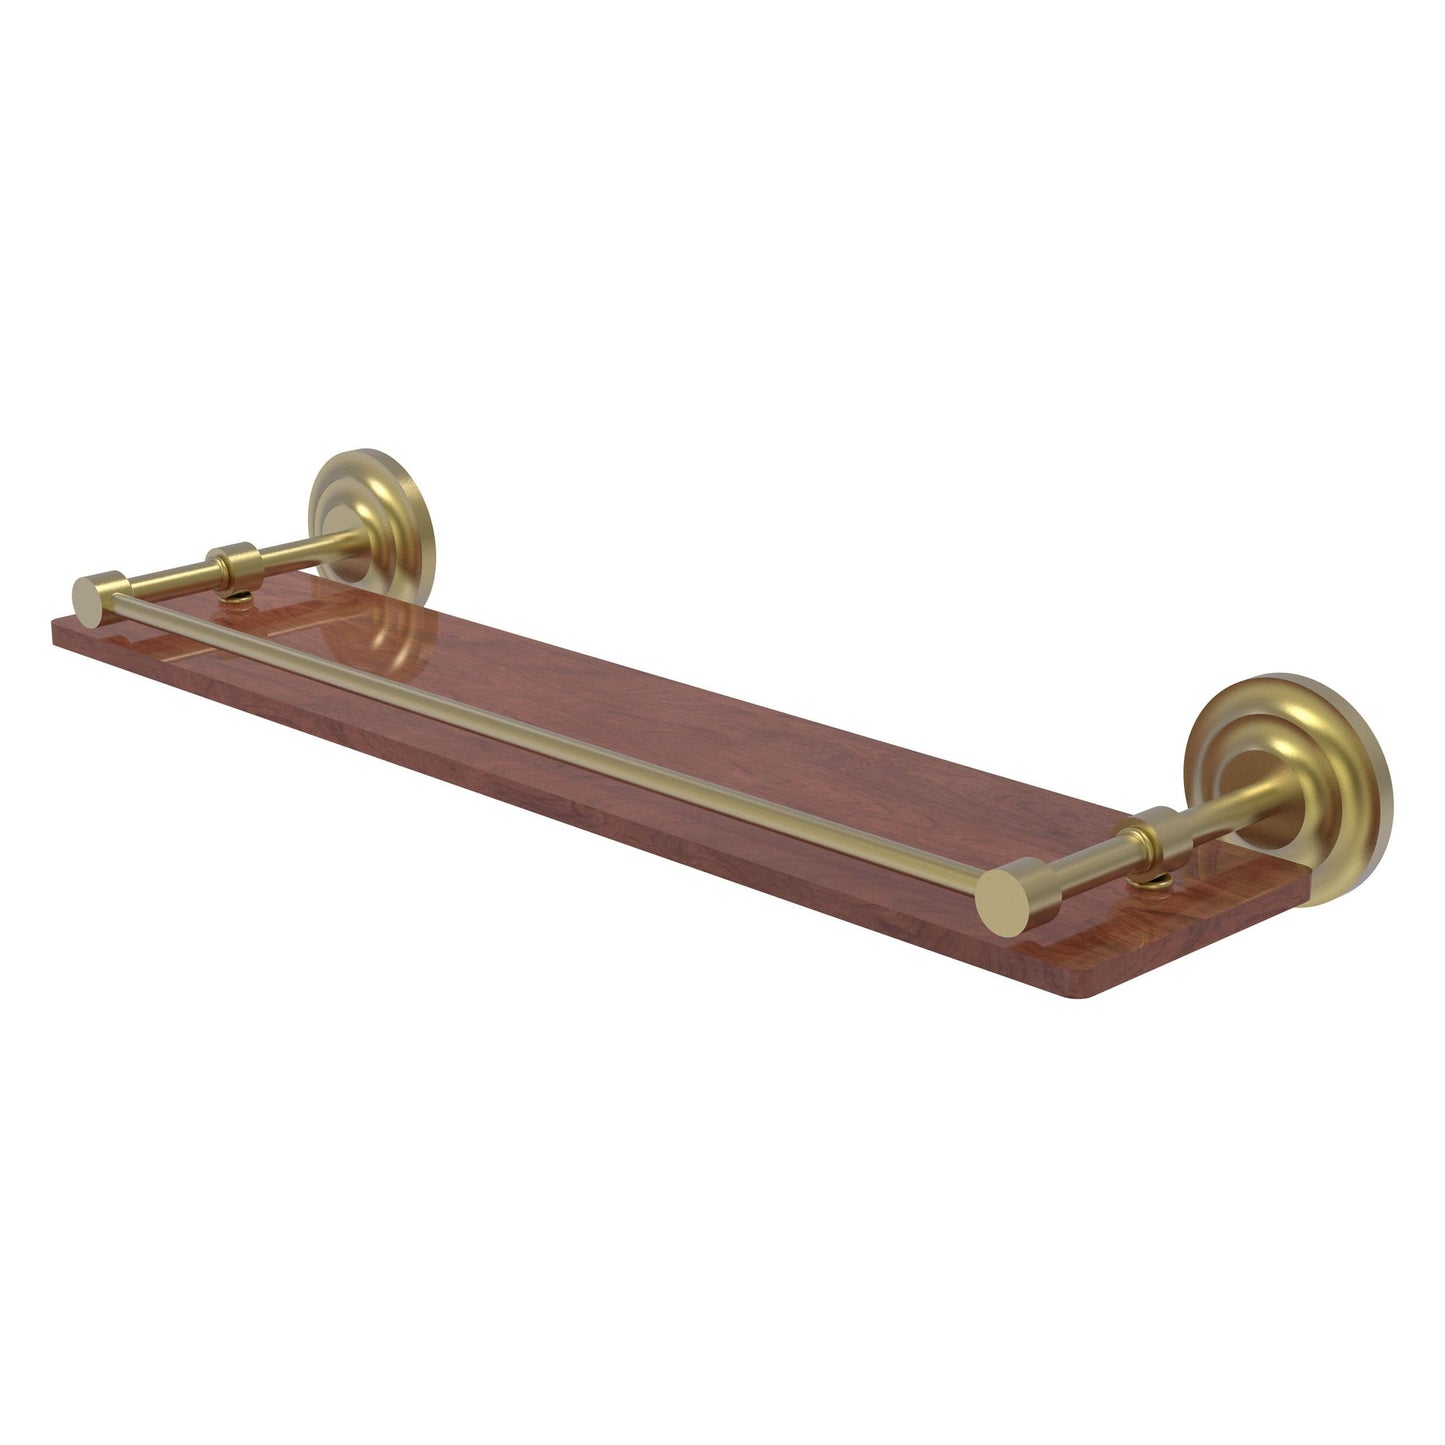 Allied Brass Que New 22" x 5" Satin Brass Solid Brass 22-Inch Solid IPE Ironwood Shelf With Gallery Rail